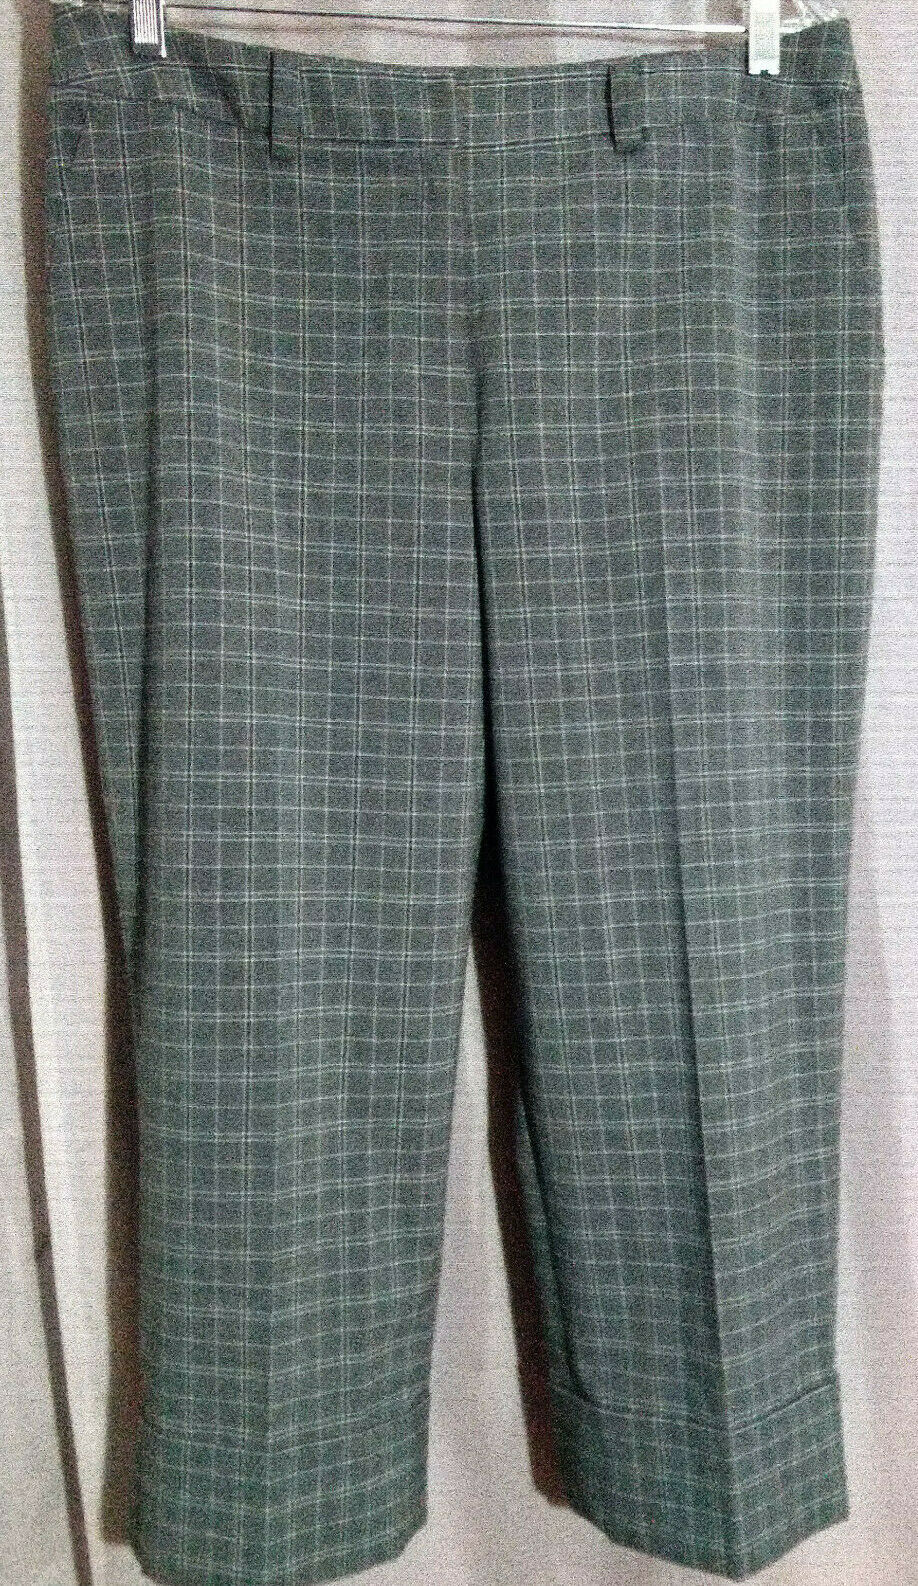 Primary image for Apostrophe Stretch Plaid Slacks Pants Gray Cuffs Poly/Rayon/Spandex Size 12